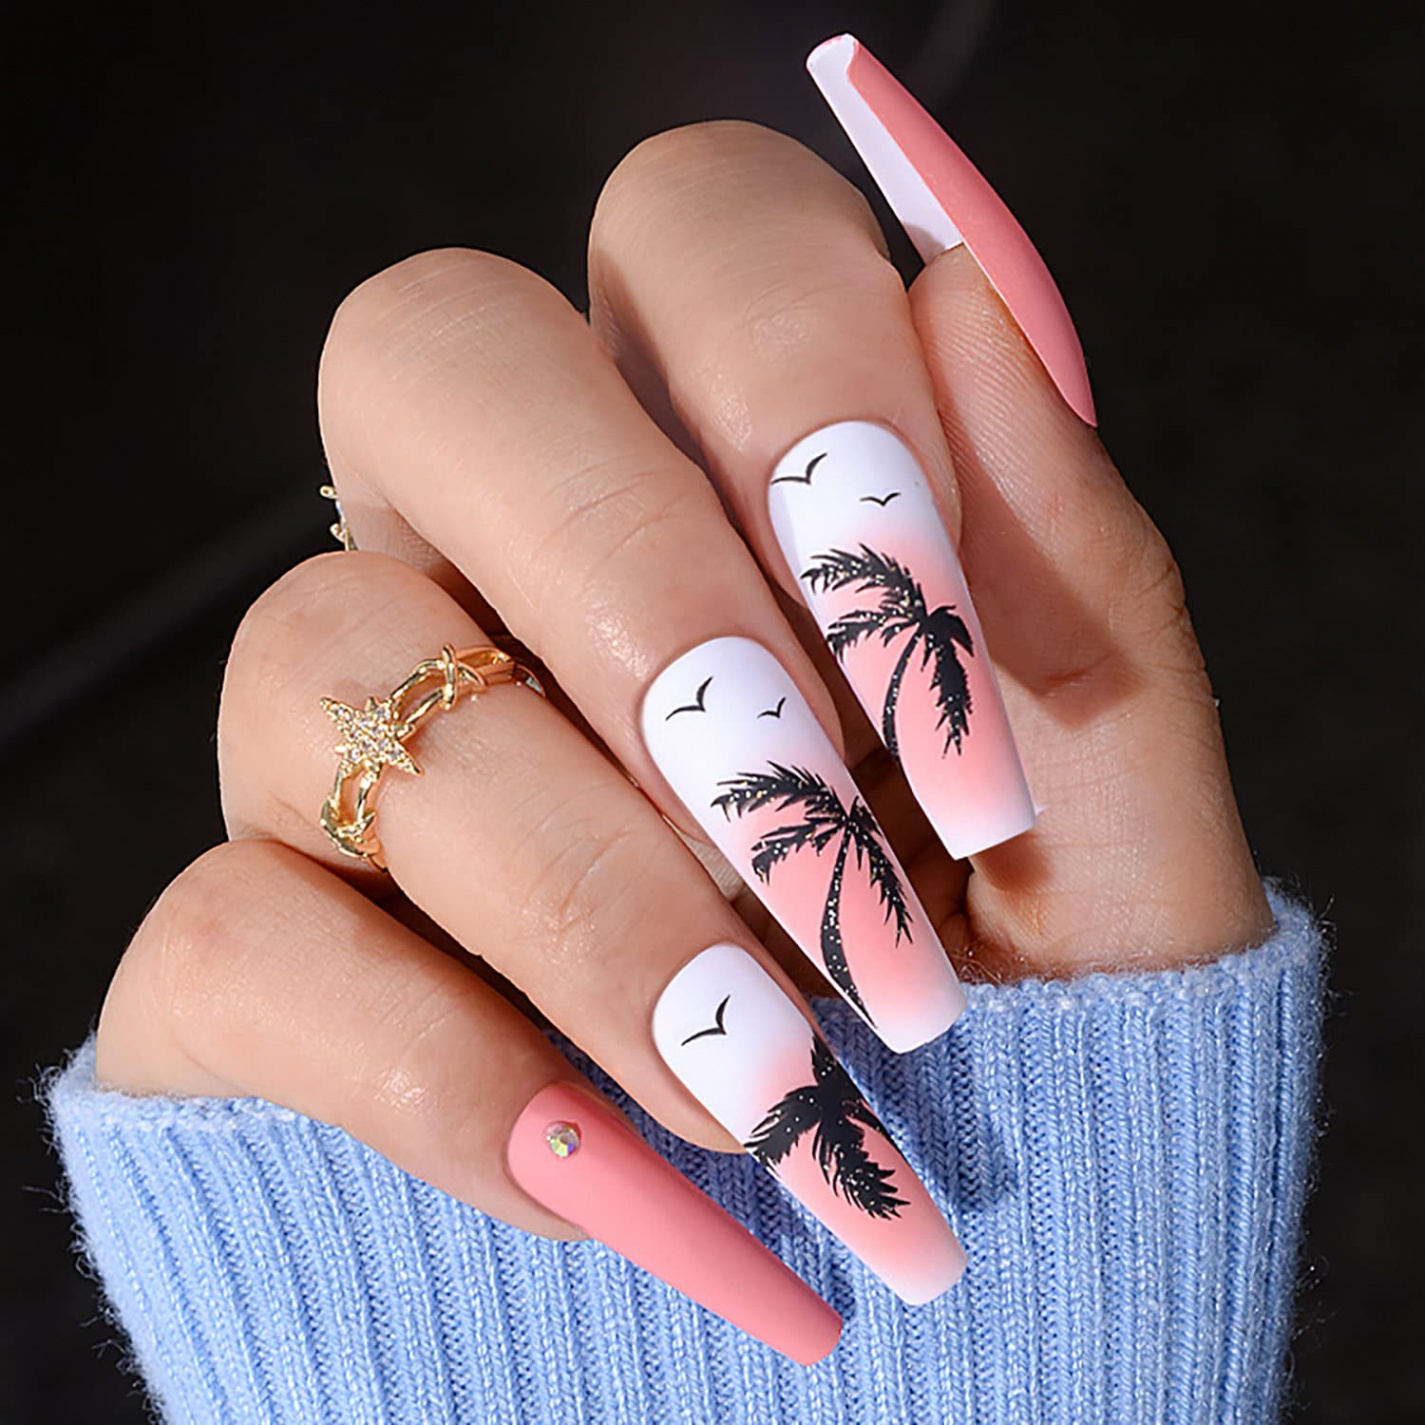 Summer Press on Nails Long Coffin Fake Nails Pink Full Cover False Nails  with Palm Tree Designs Matte Glue on Nails Holiday Acrylic Nails for Women